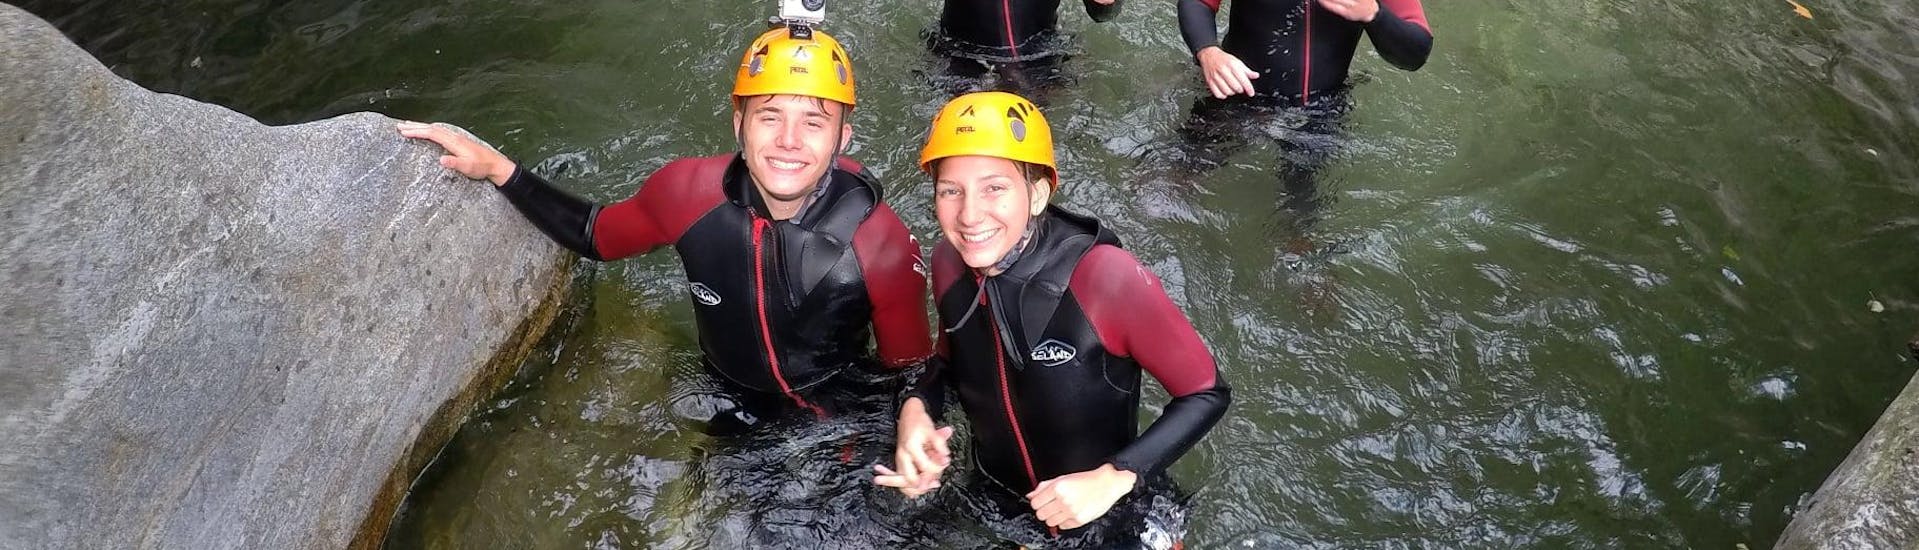 A family having fun while Canyoning in the Corippo Canyon with Ticino Adventures.